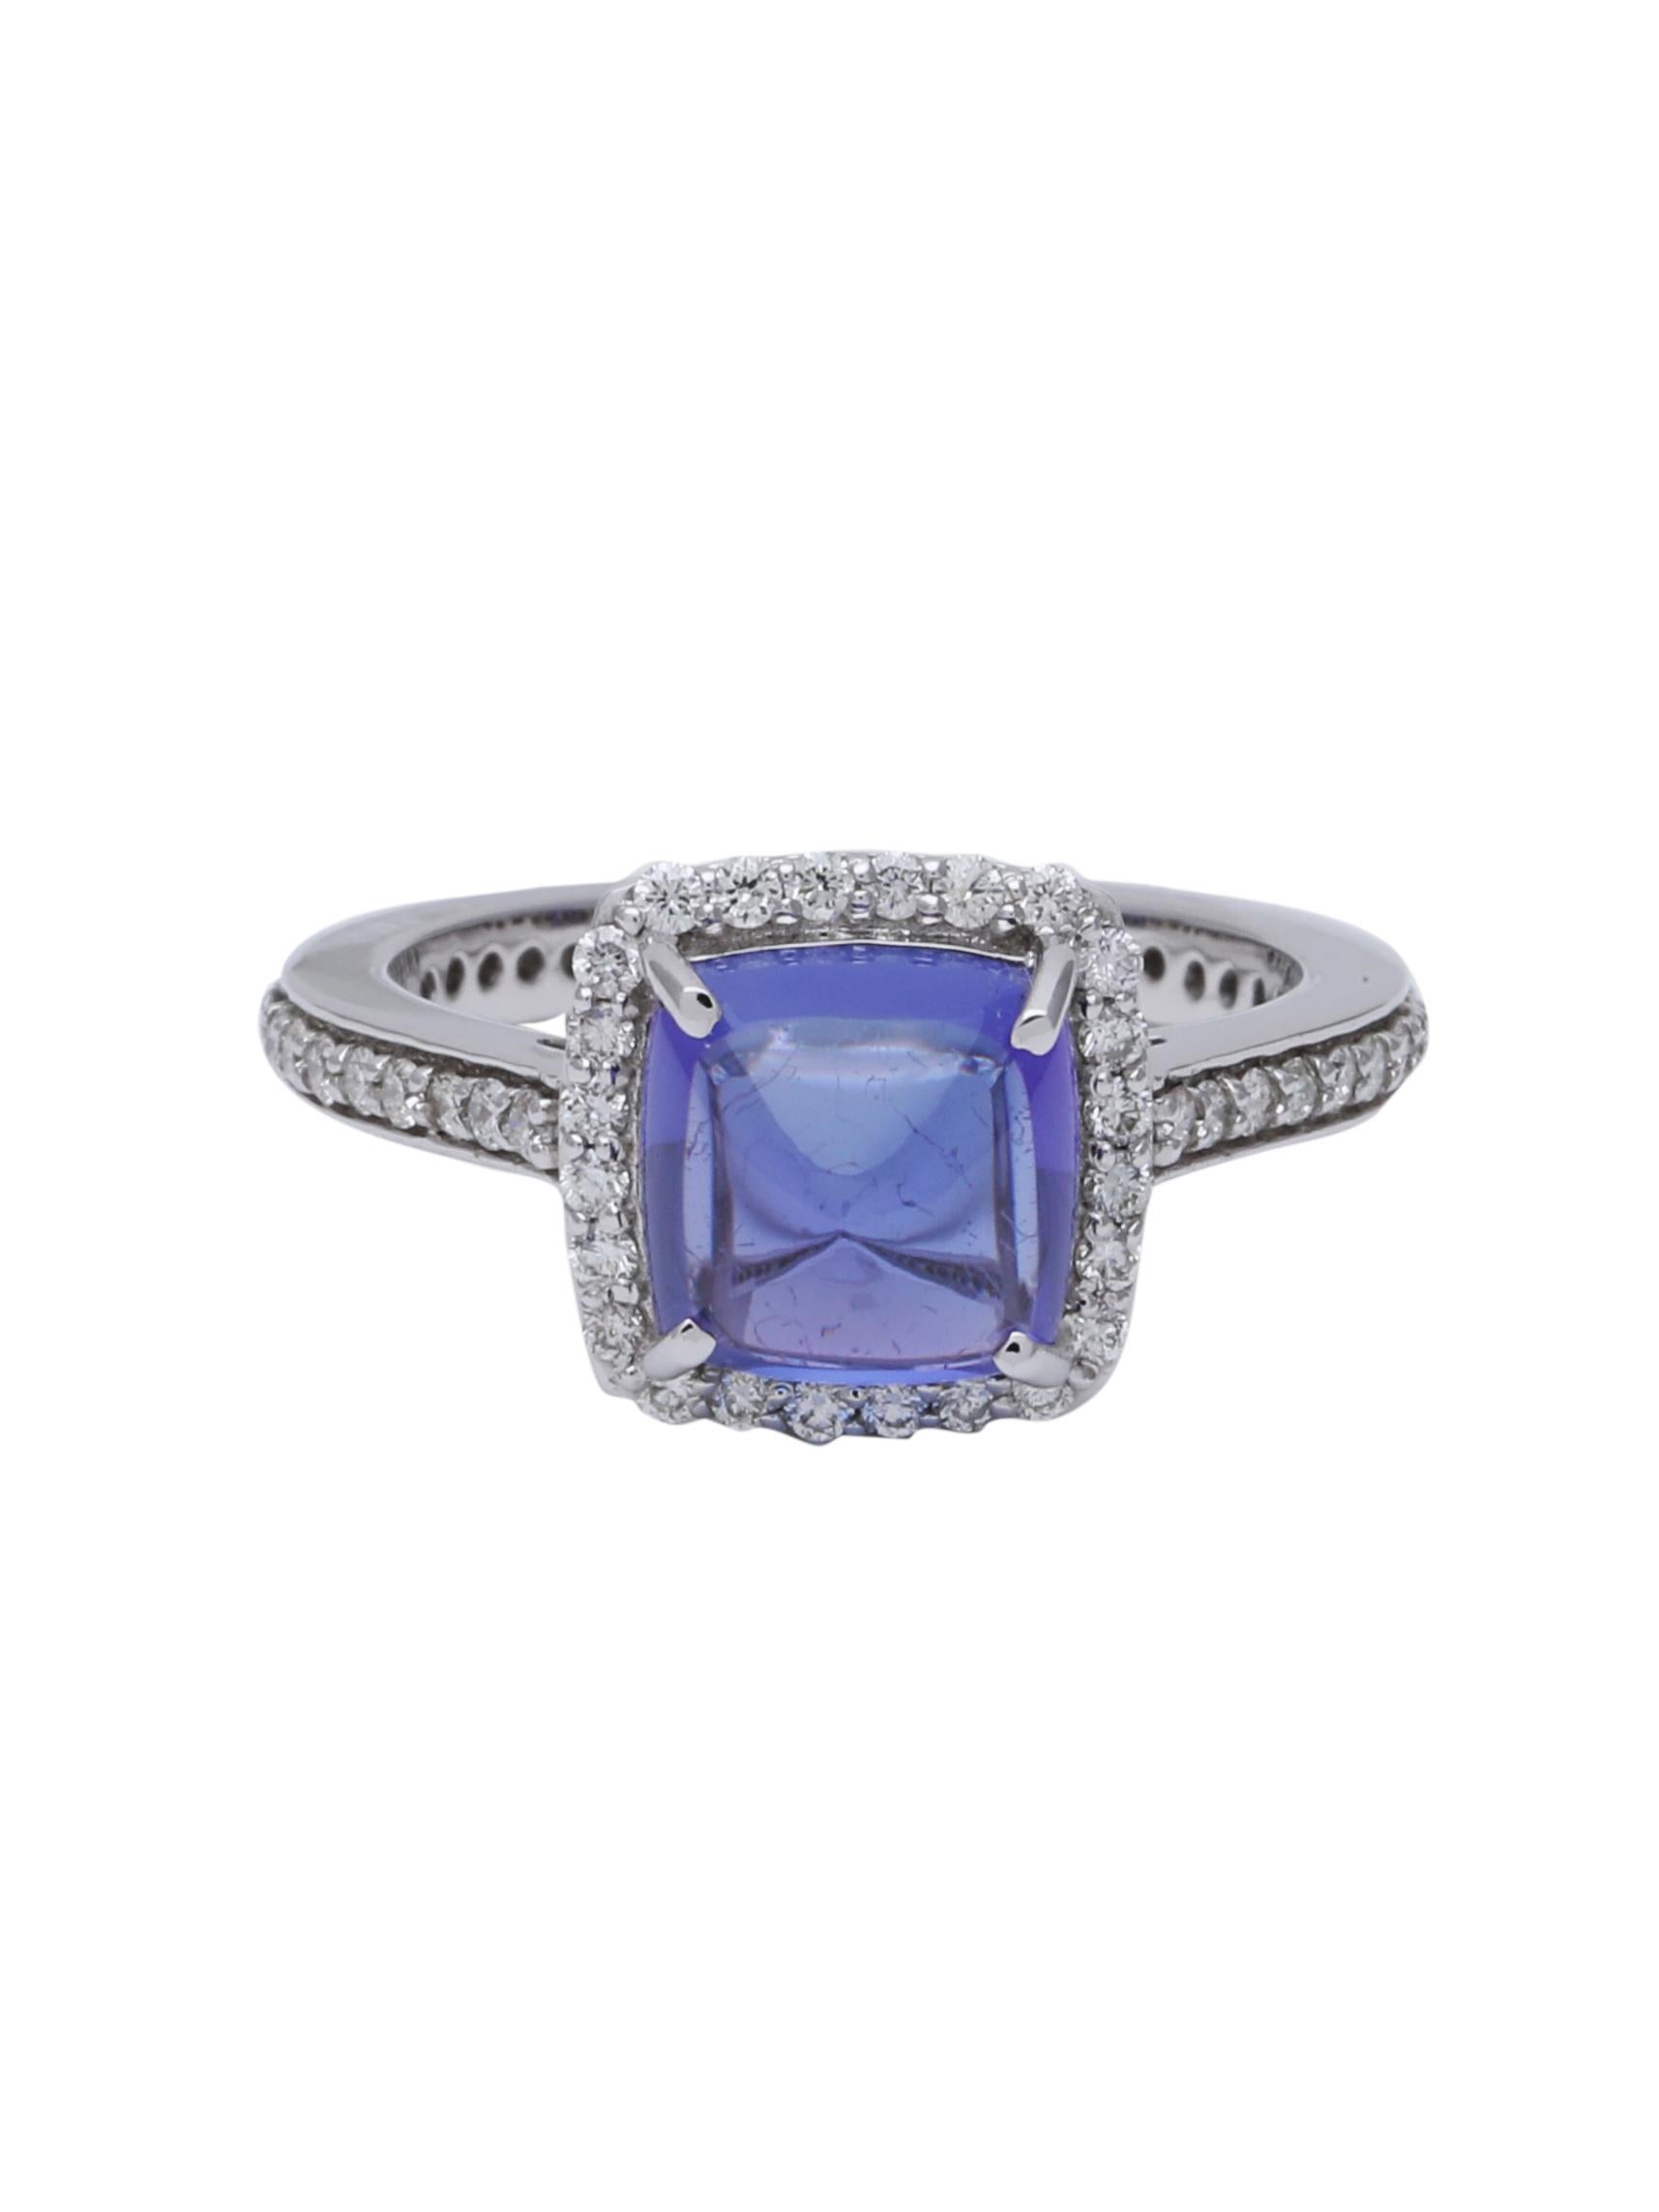 Top Quality Loupe clean Tanzanite Sugarloaf weighing 3.45 carats set with diamonds all around in a halo setting. The ring is beautifully made in 18K White Gold.
The Tanzanite has a really pretty dome and the colour is perfect and pops out on the